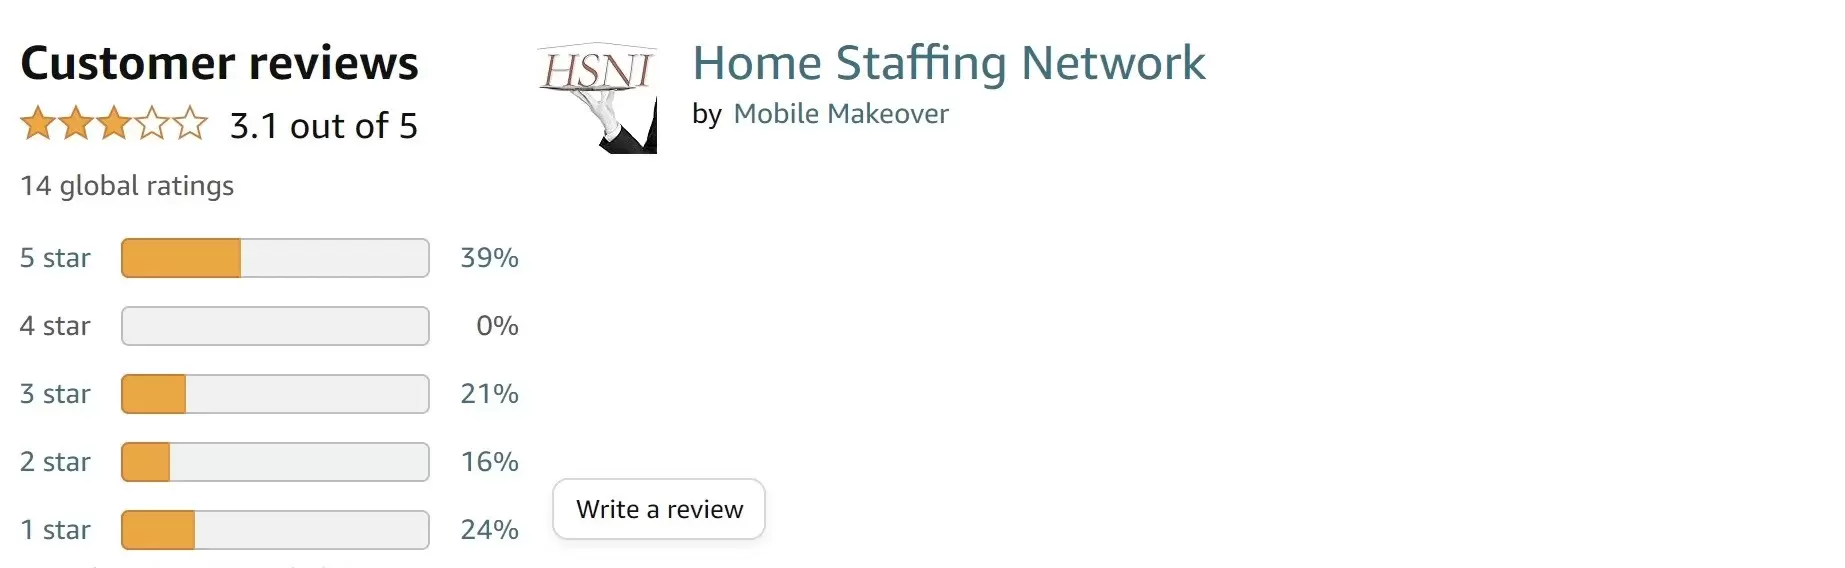 critical review of the Home Staffing Network